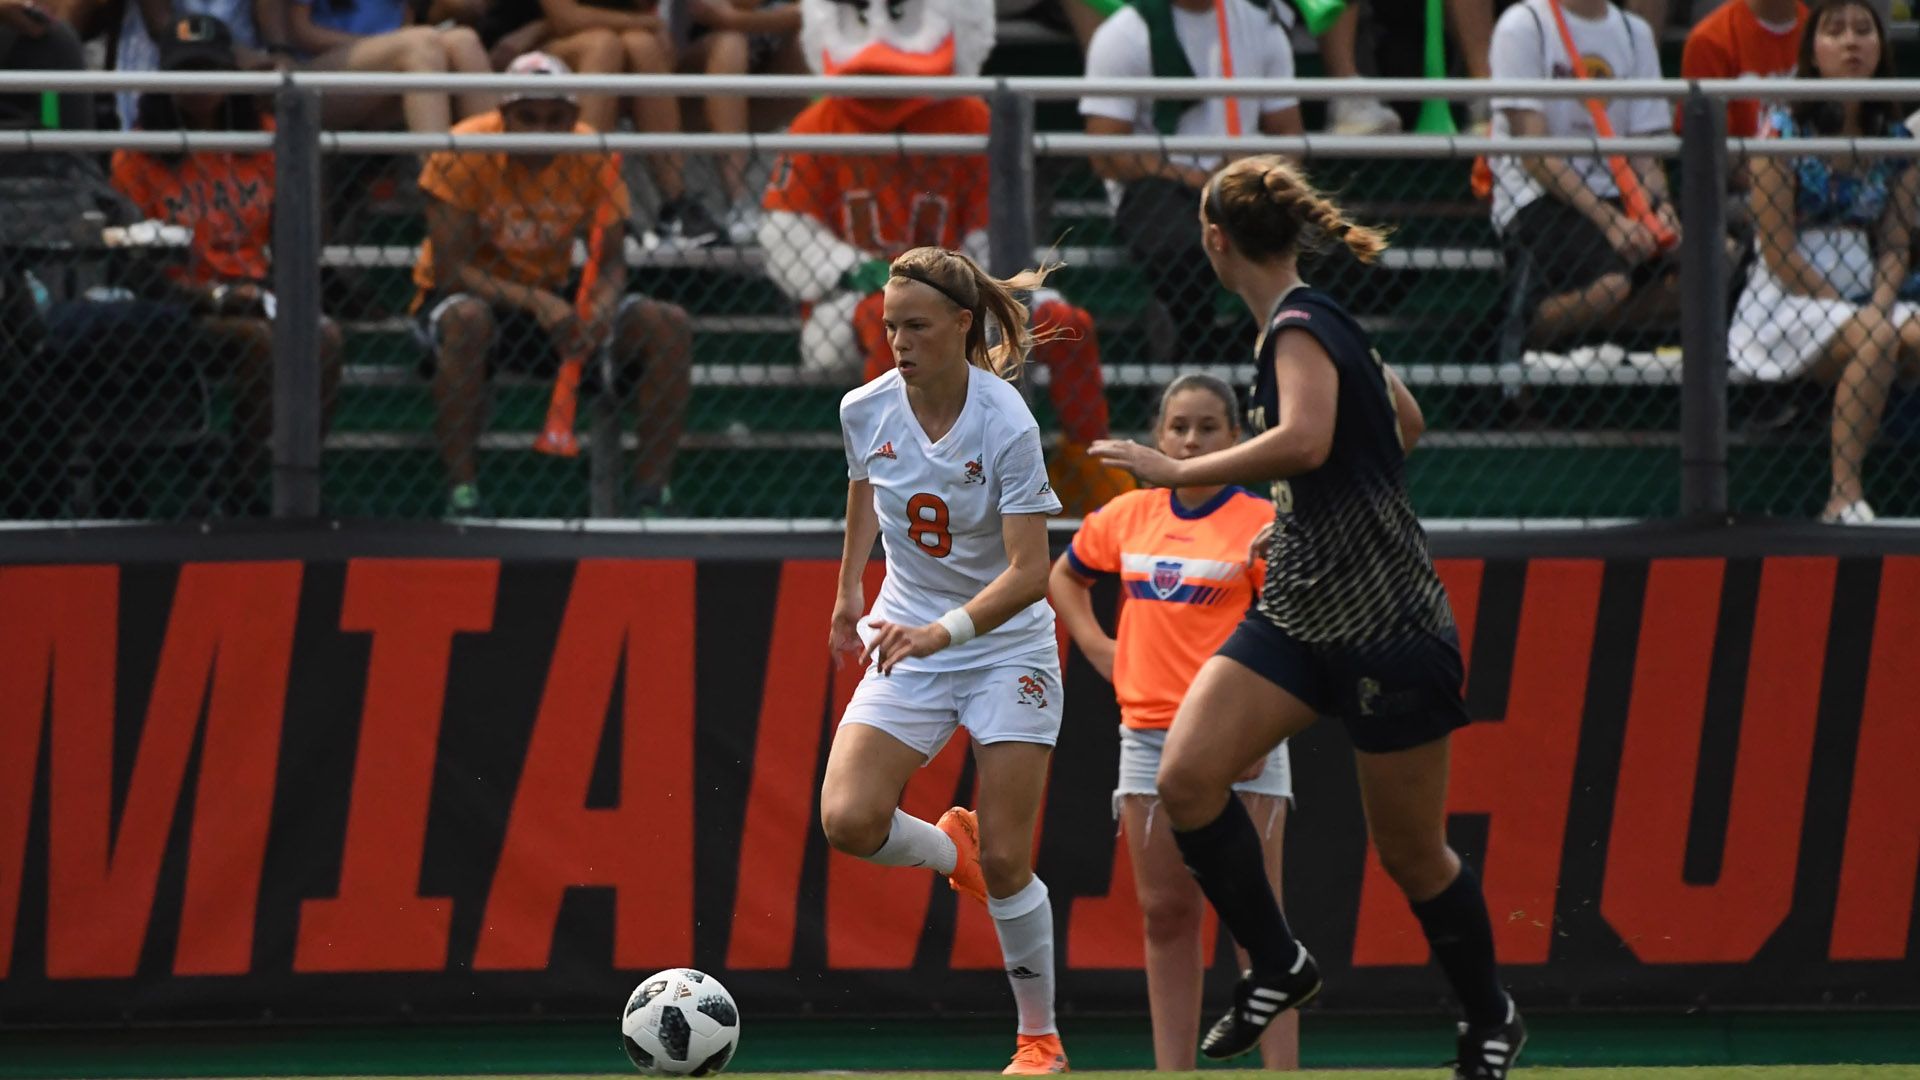 Canes Shut Out Syracuse, 1-0